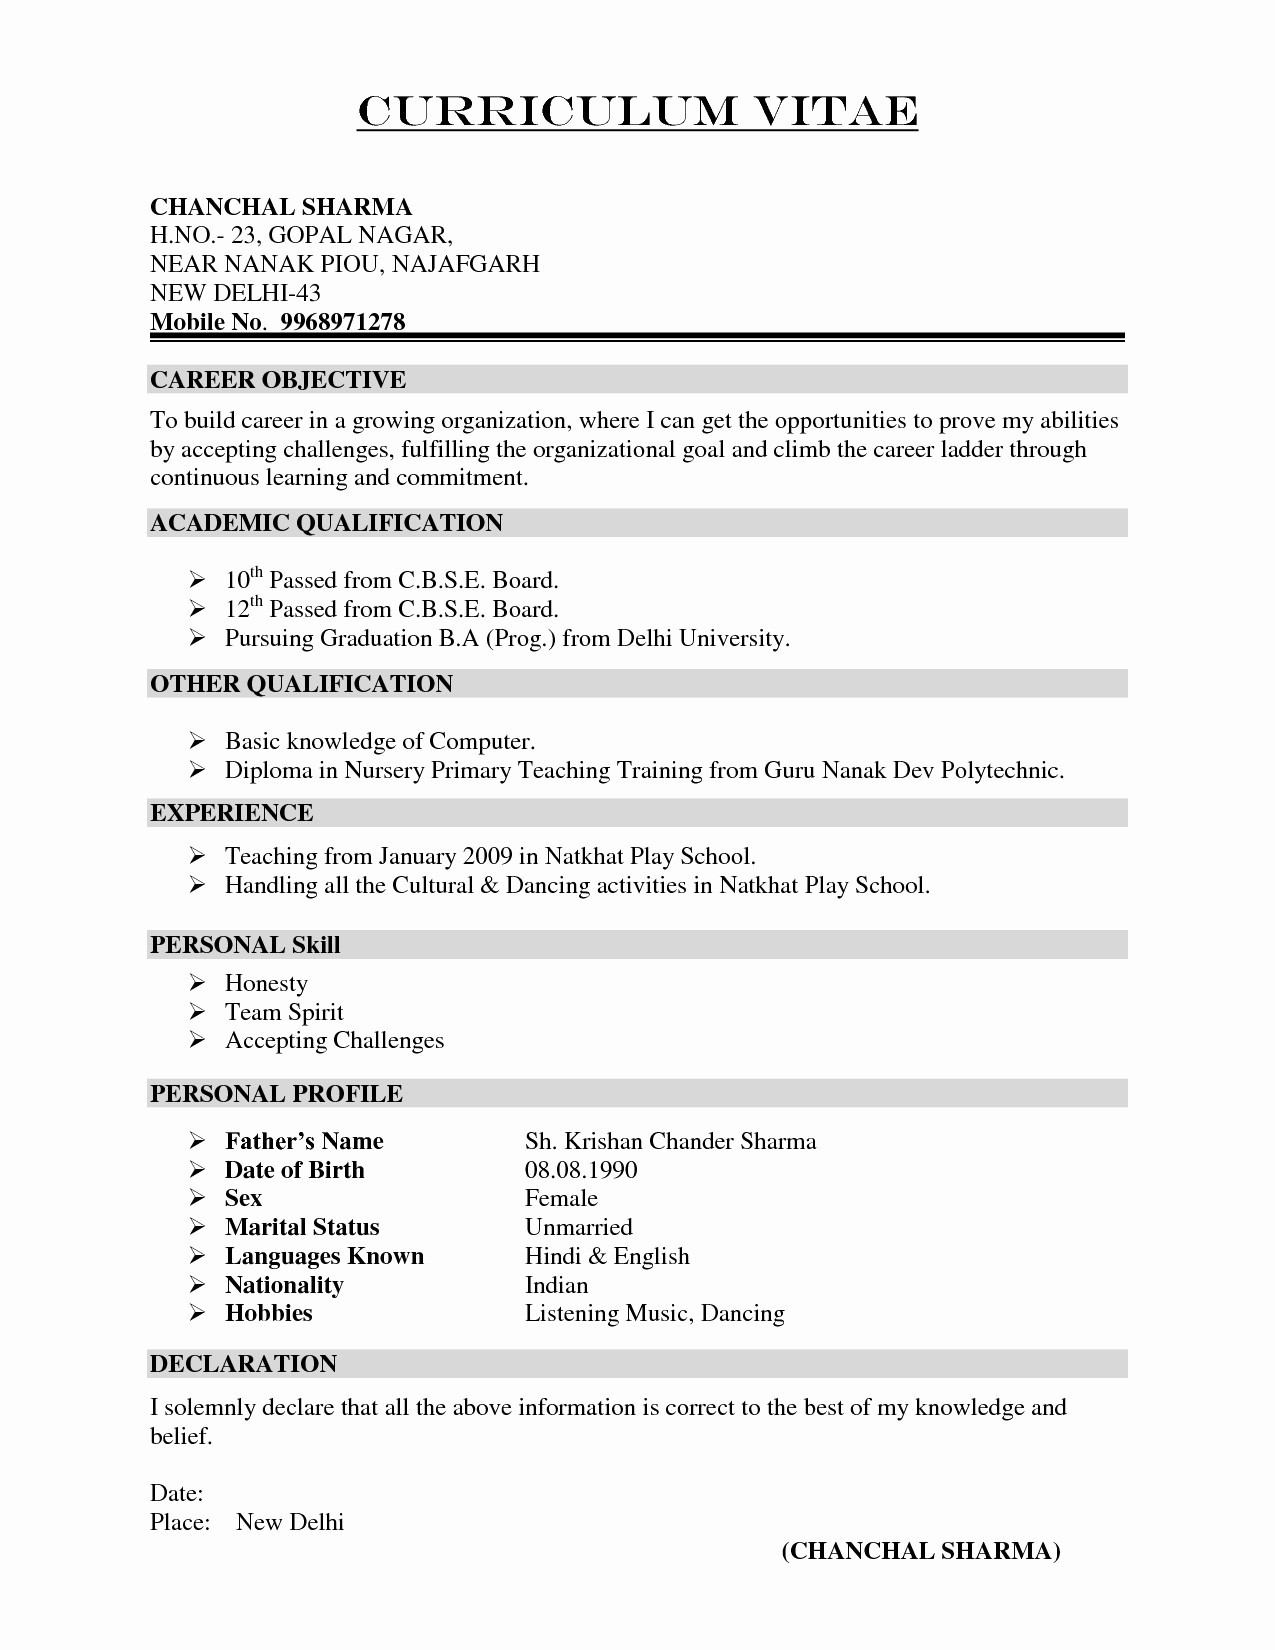 email covering letter template Collection-New Resume Cover Letter formatted Resume 0d Email Resume Cover resume writing examples 16-g